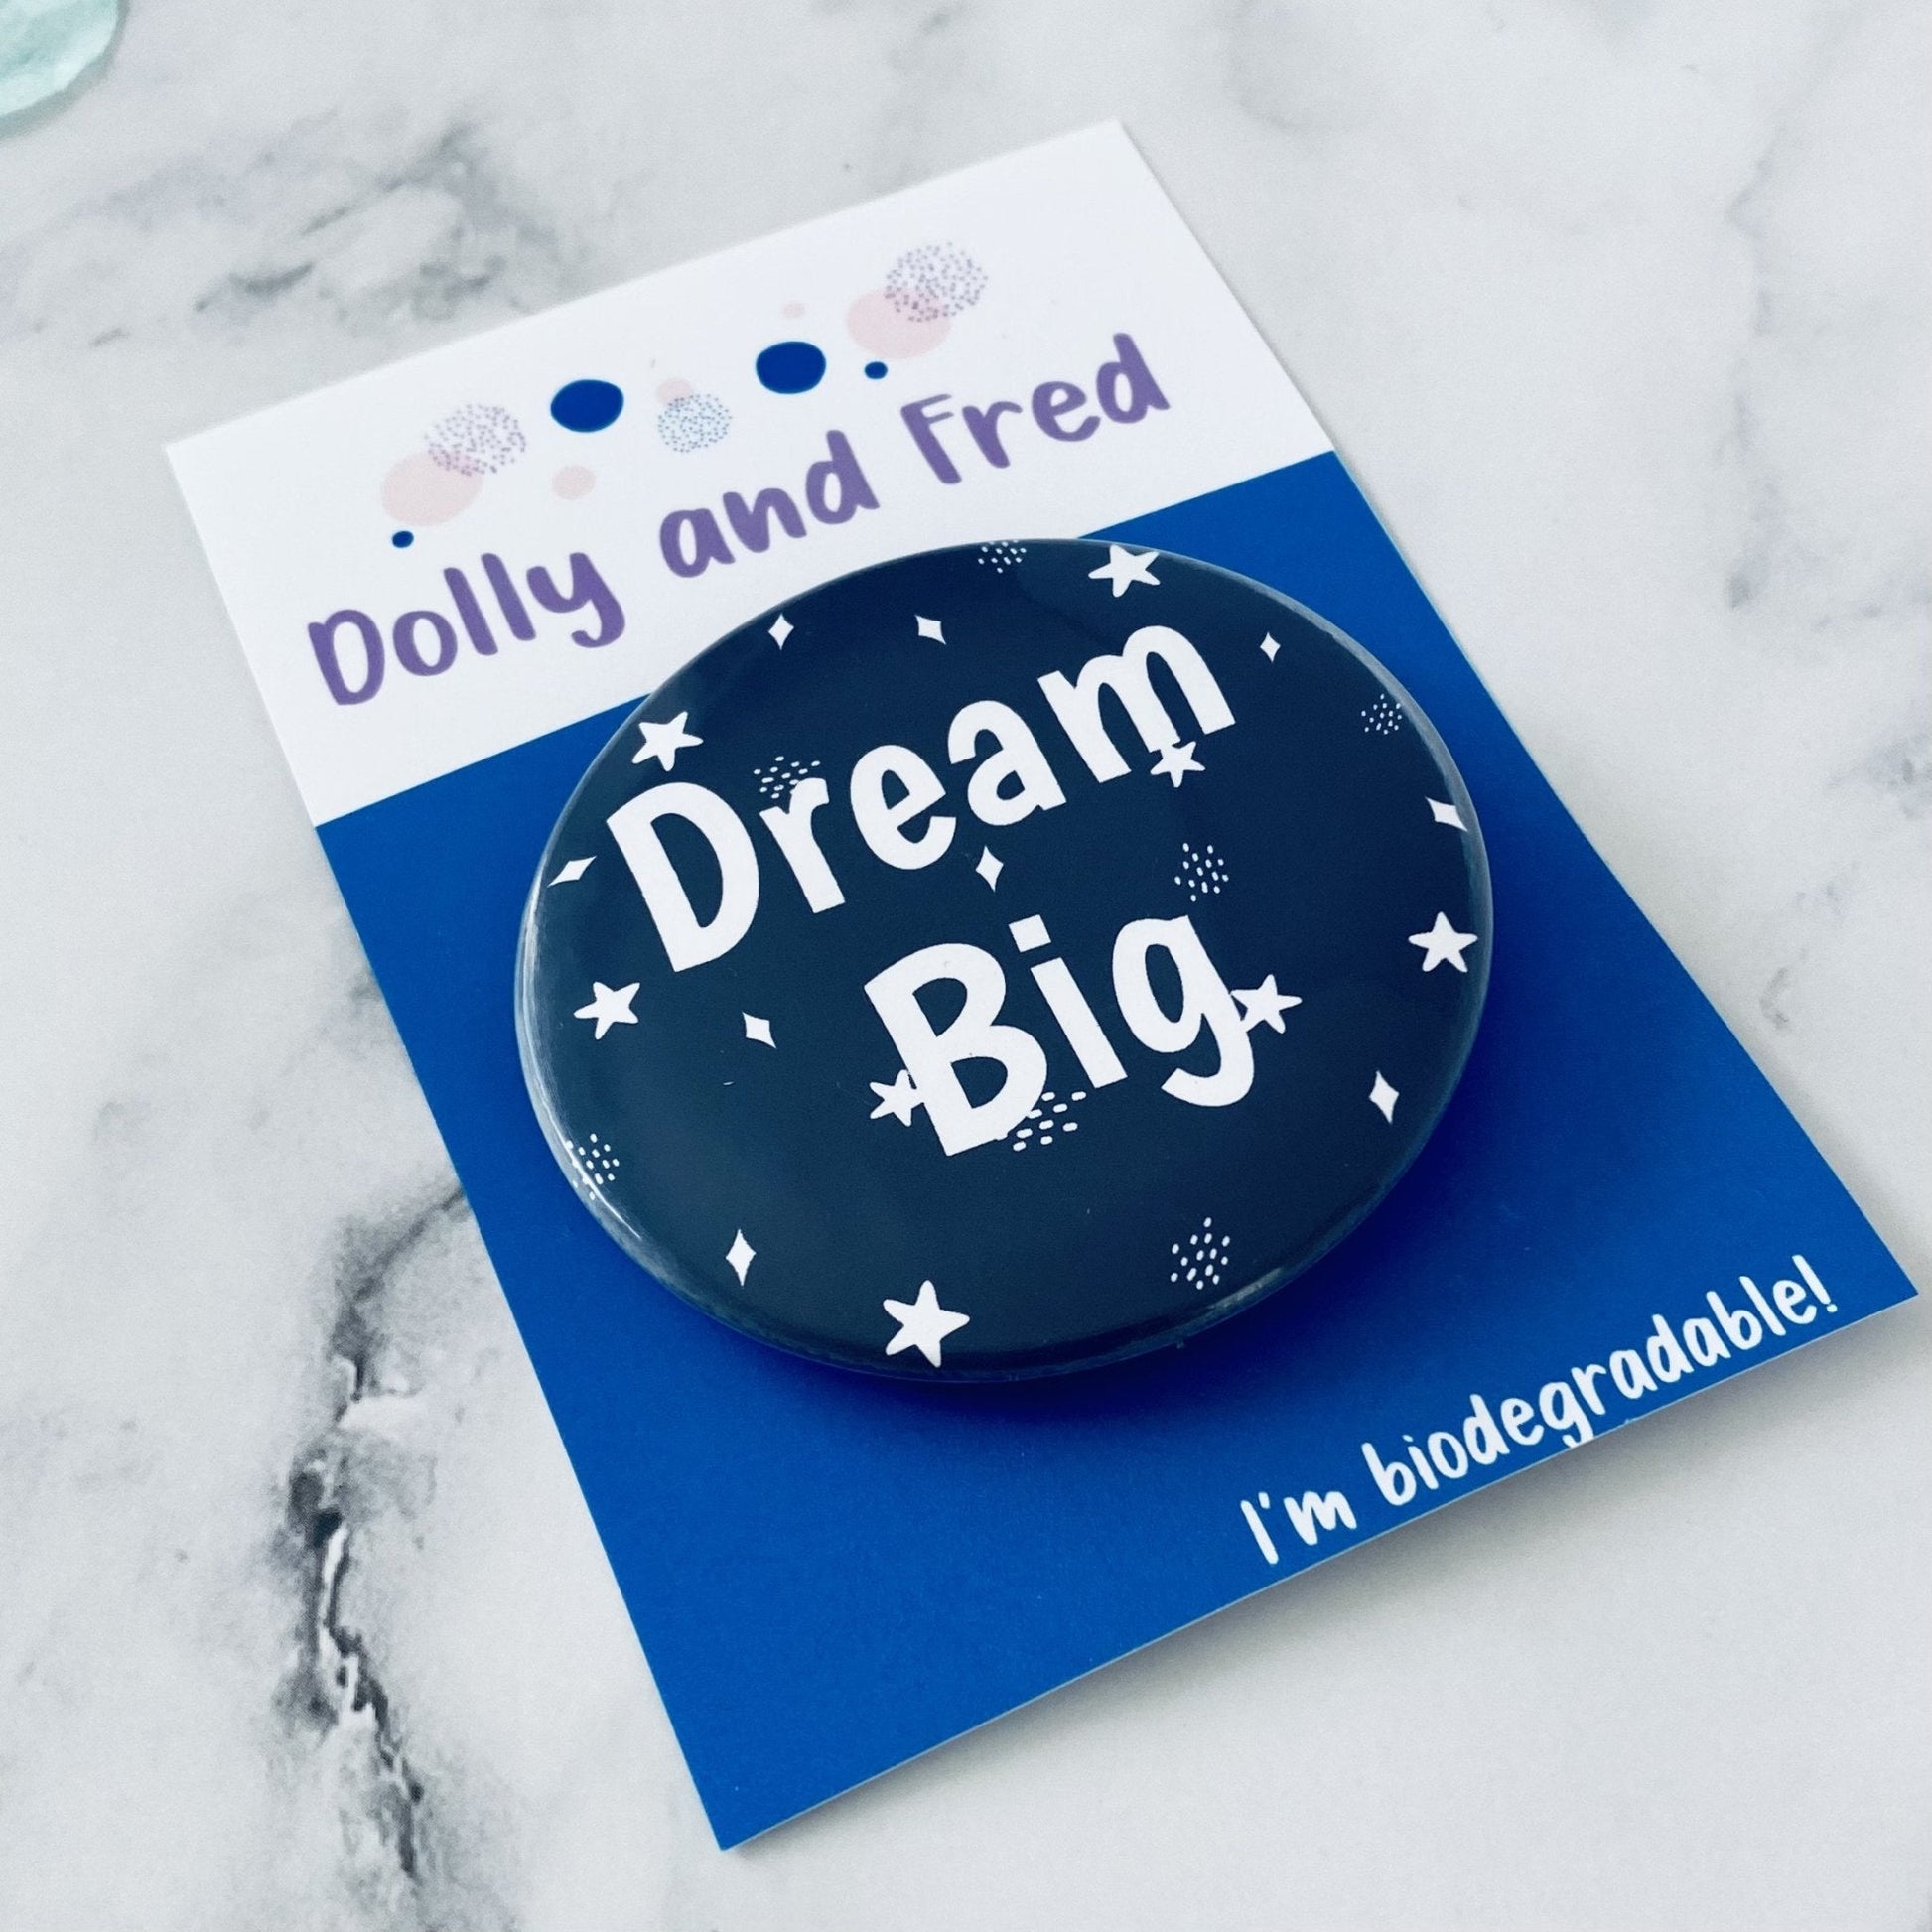 Navy Dream Big Badge - Dolly and Fred Designs